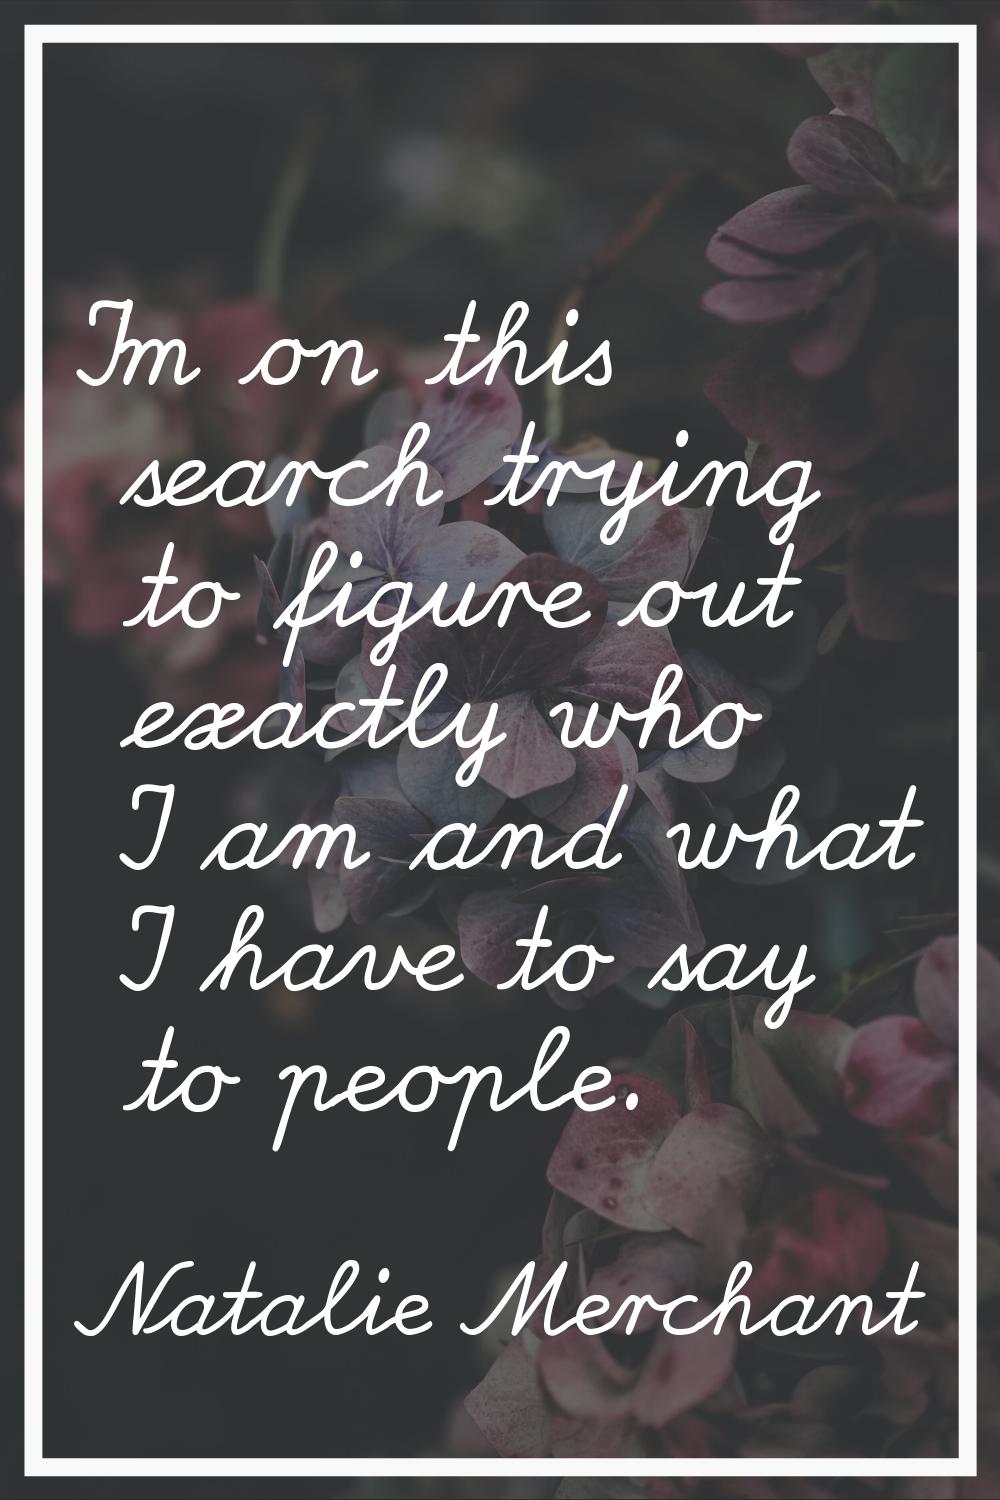 I'm on this search trying to figure out exactly who I am and what I have to say to people.